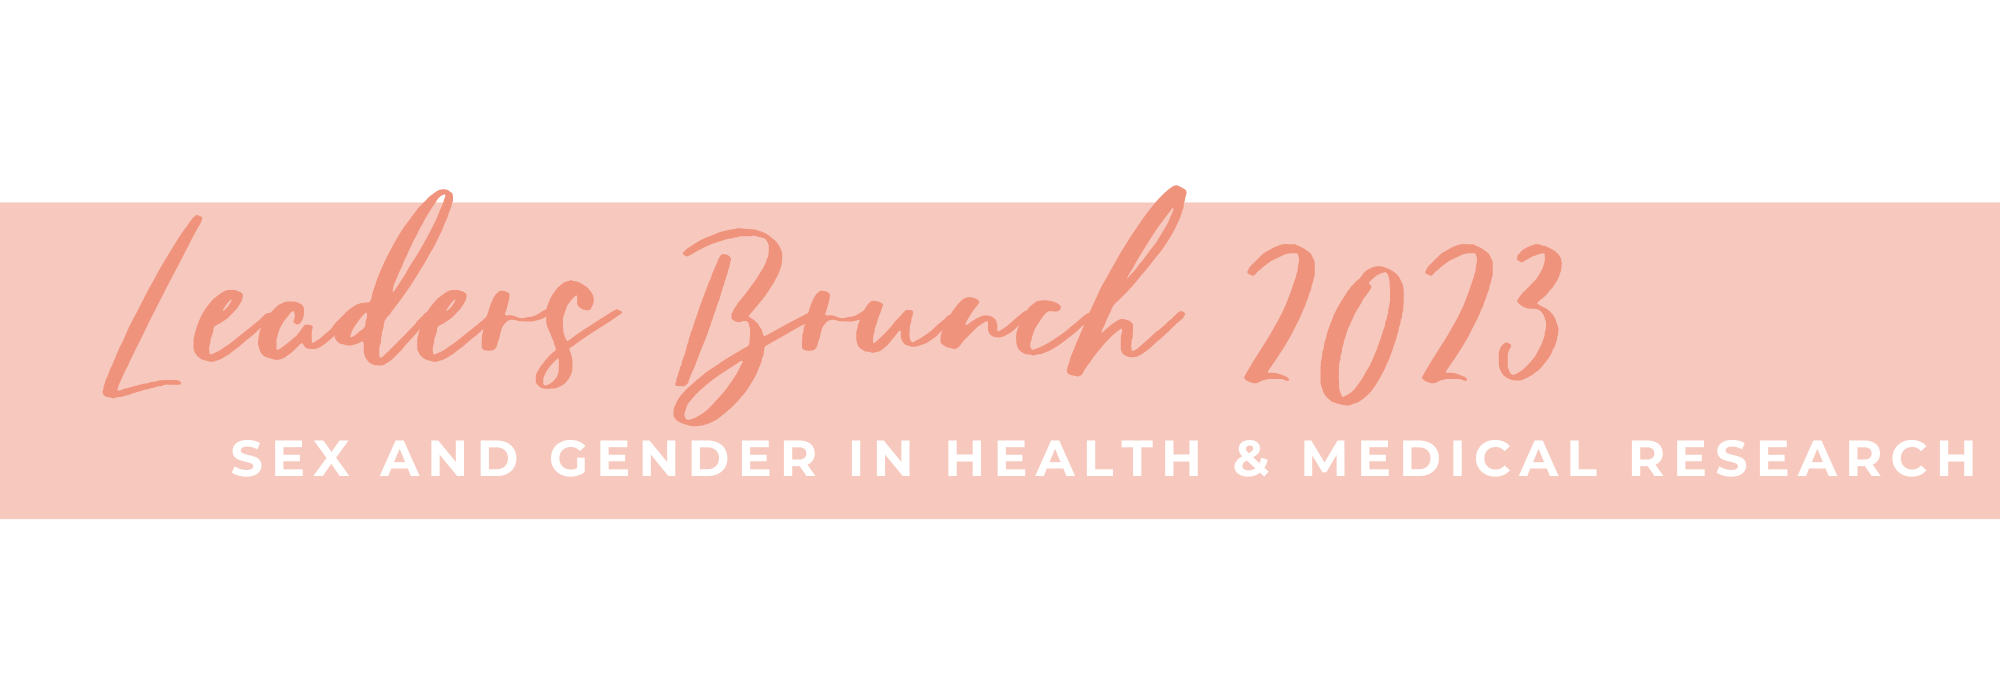 Leaders Brunch 2023: Sex and Gender in Health and Medical Research